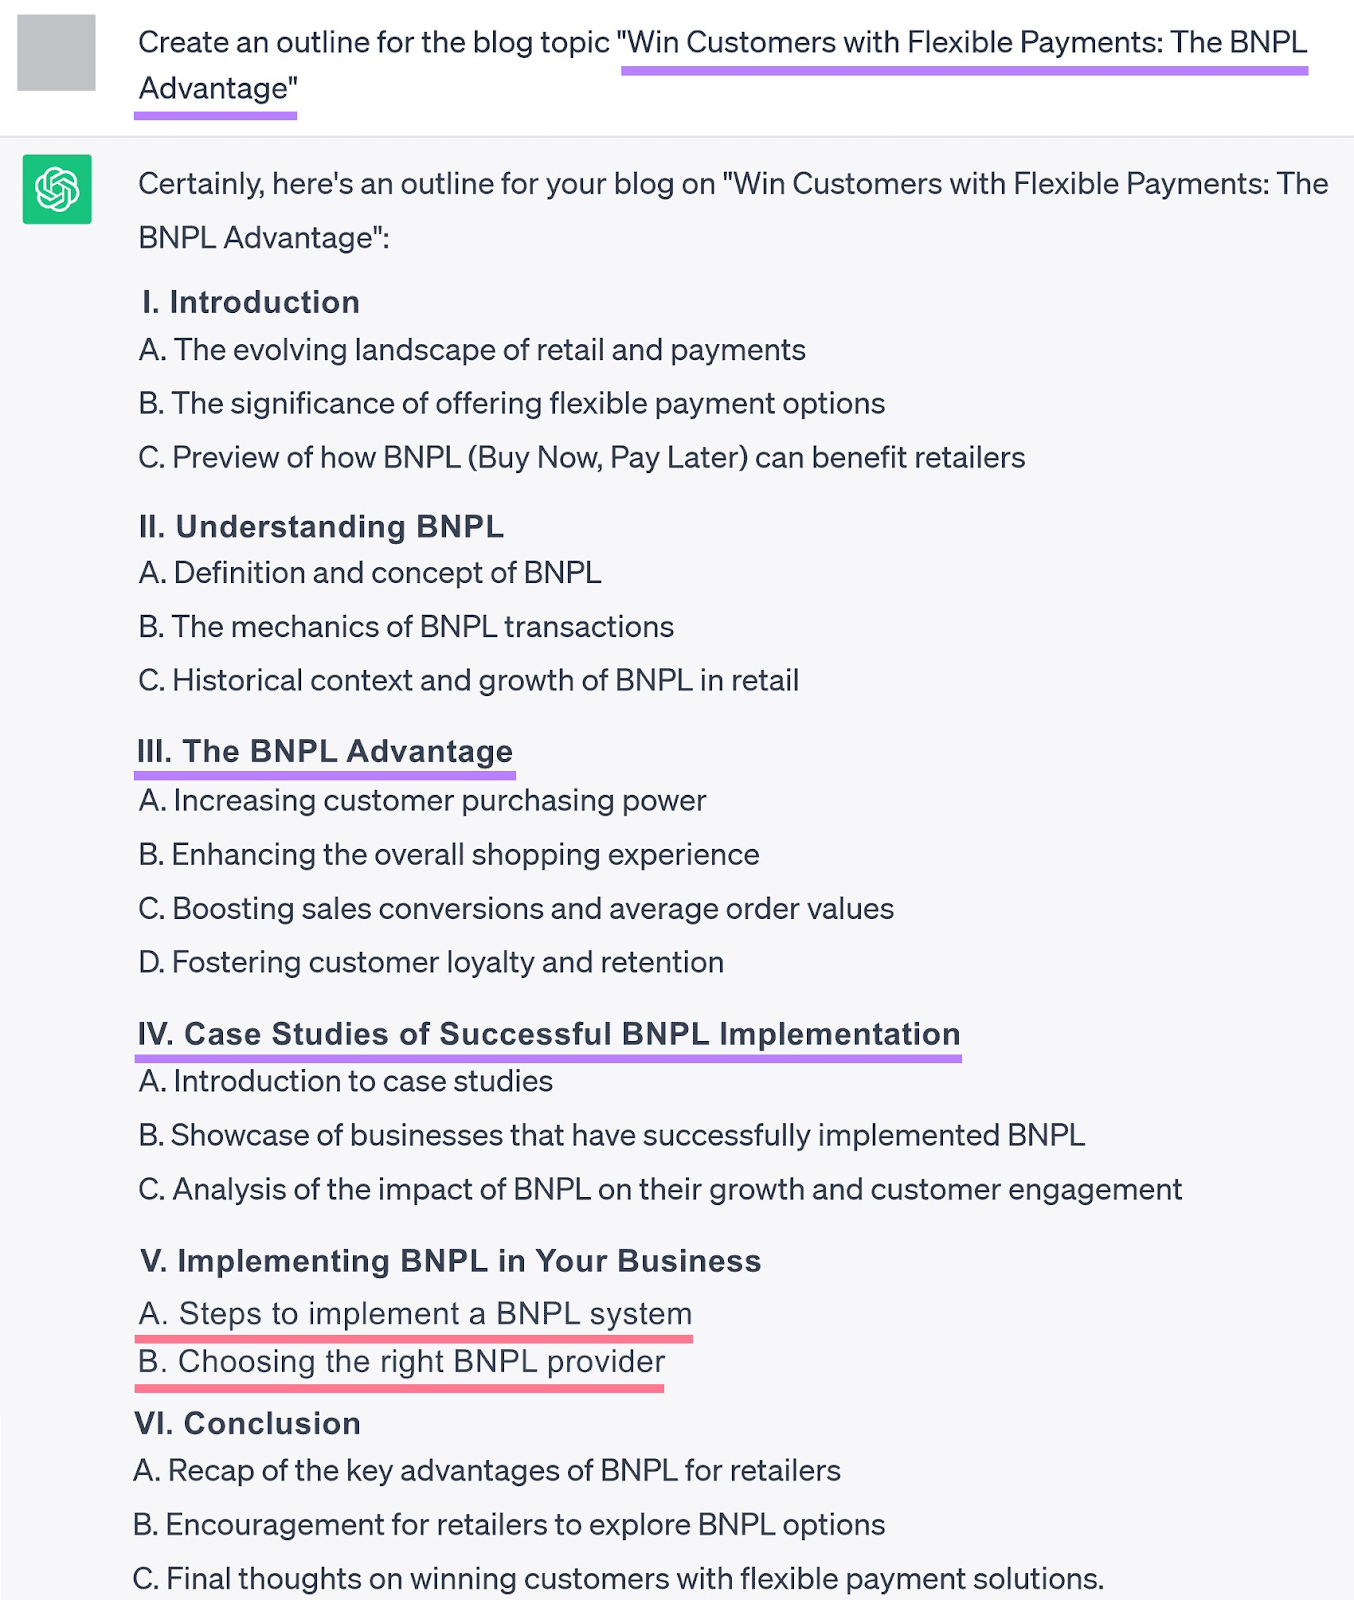 A prompt asking ChatGPT to generate an outline for “Win Customers with Flexible Payments: The BNPL Advantage” headline